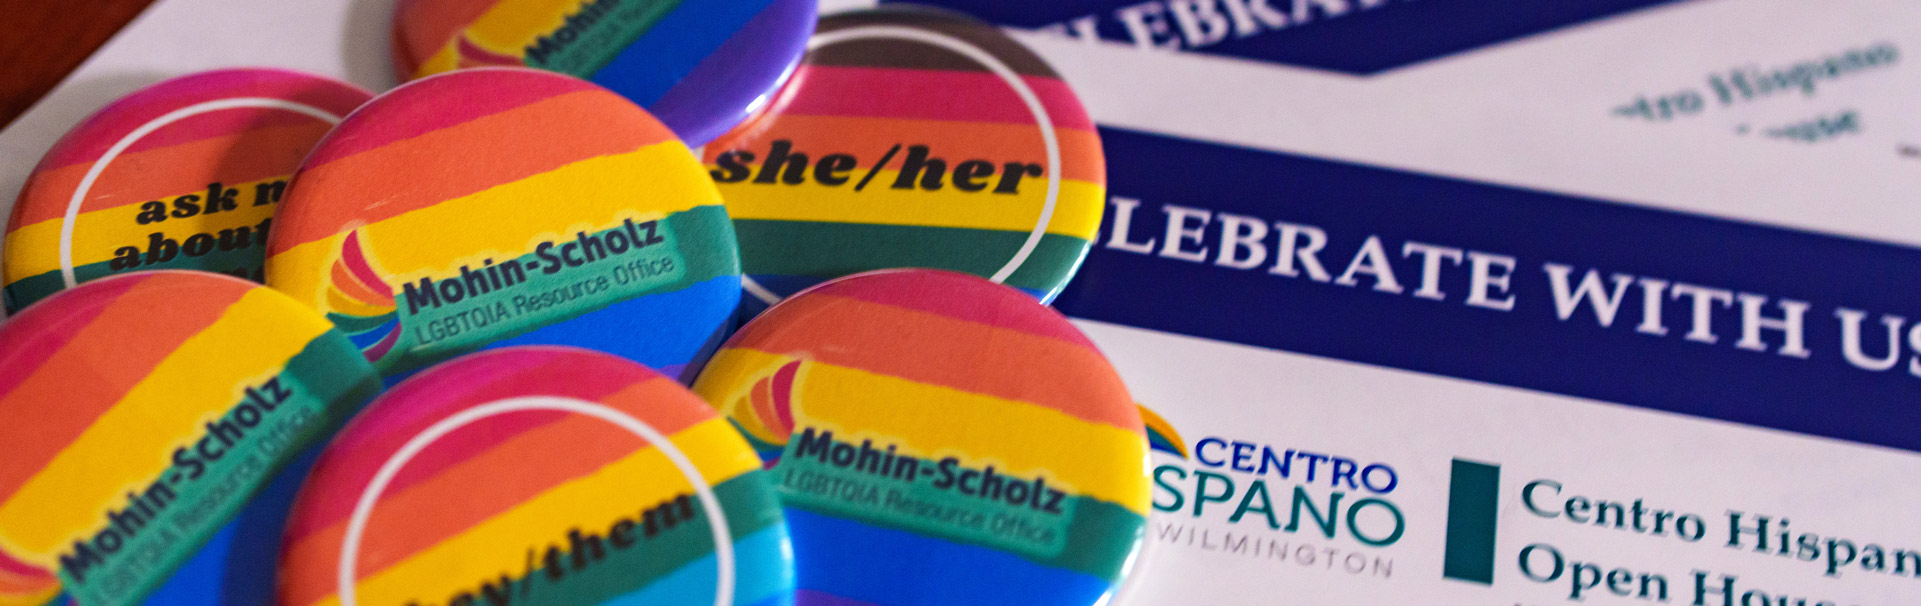 Rainbow buttons on a table with pronouns